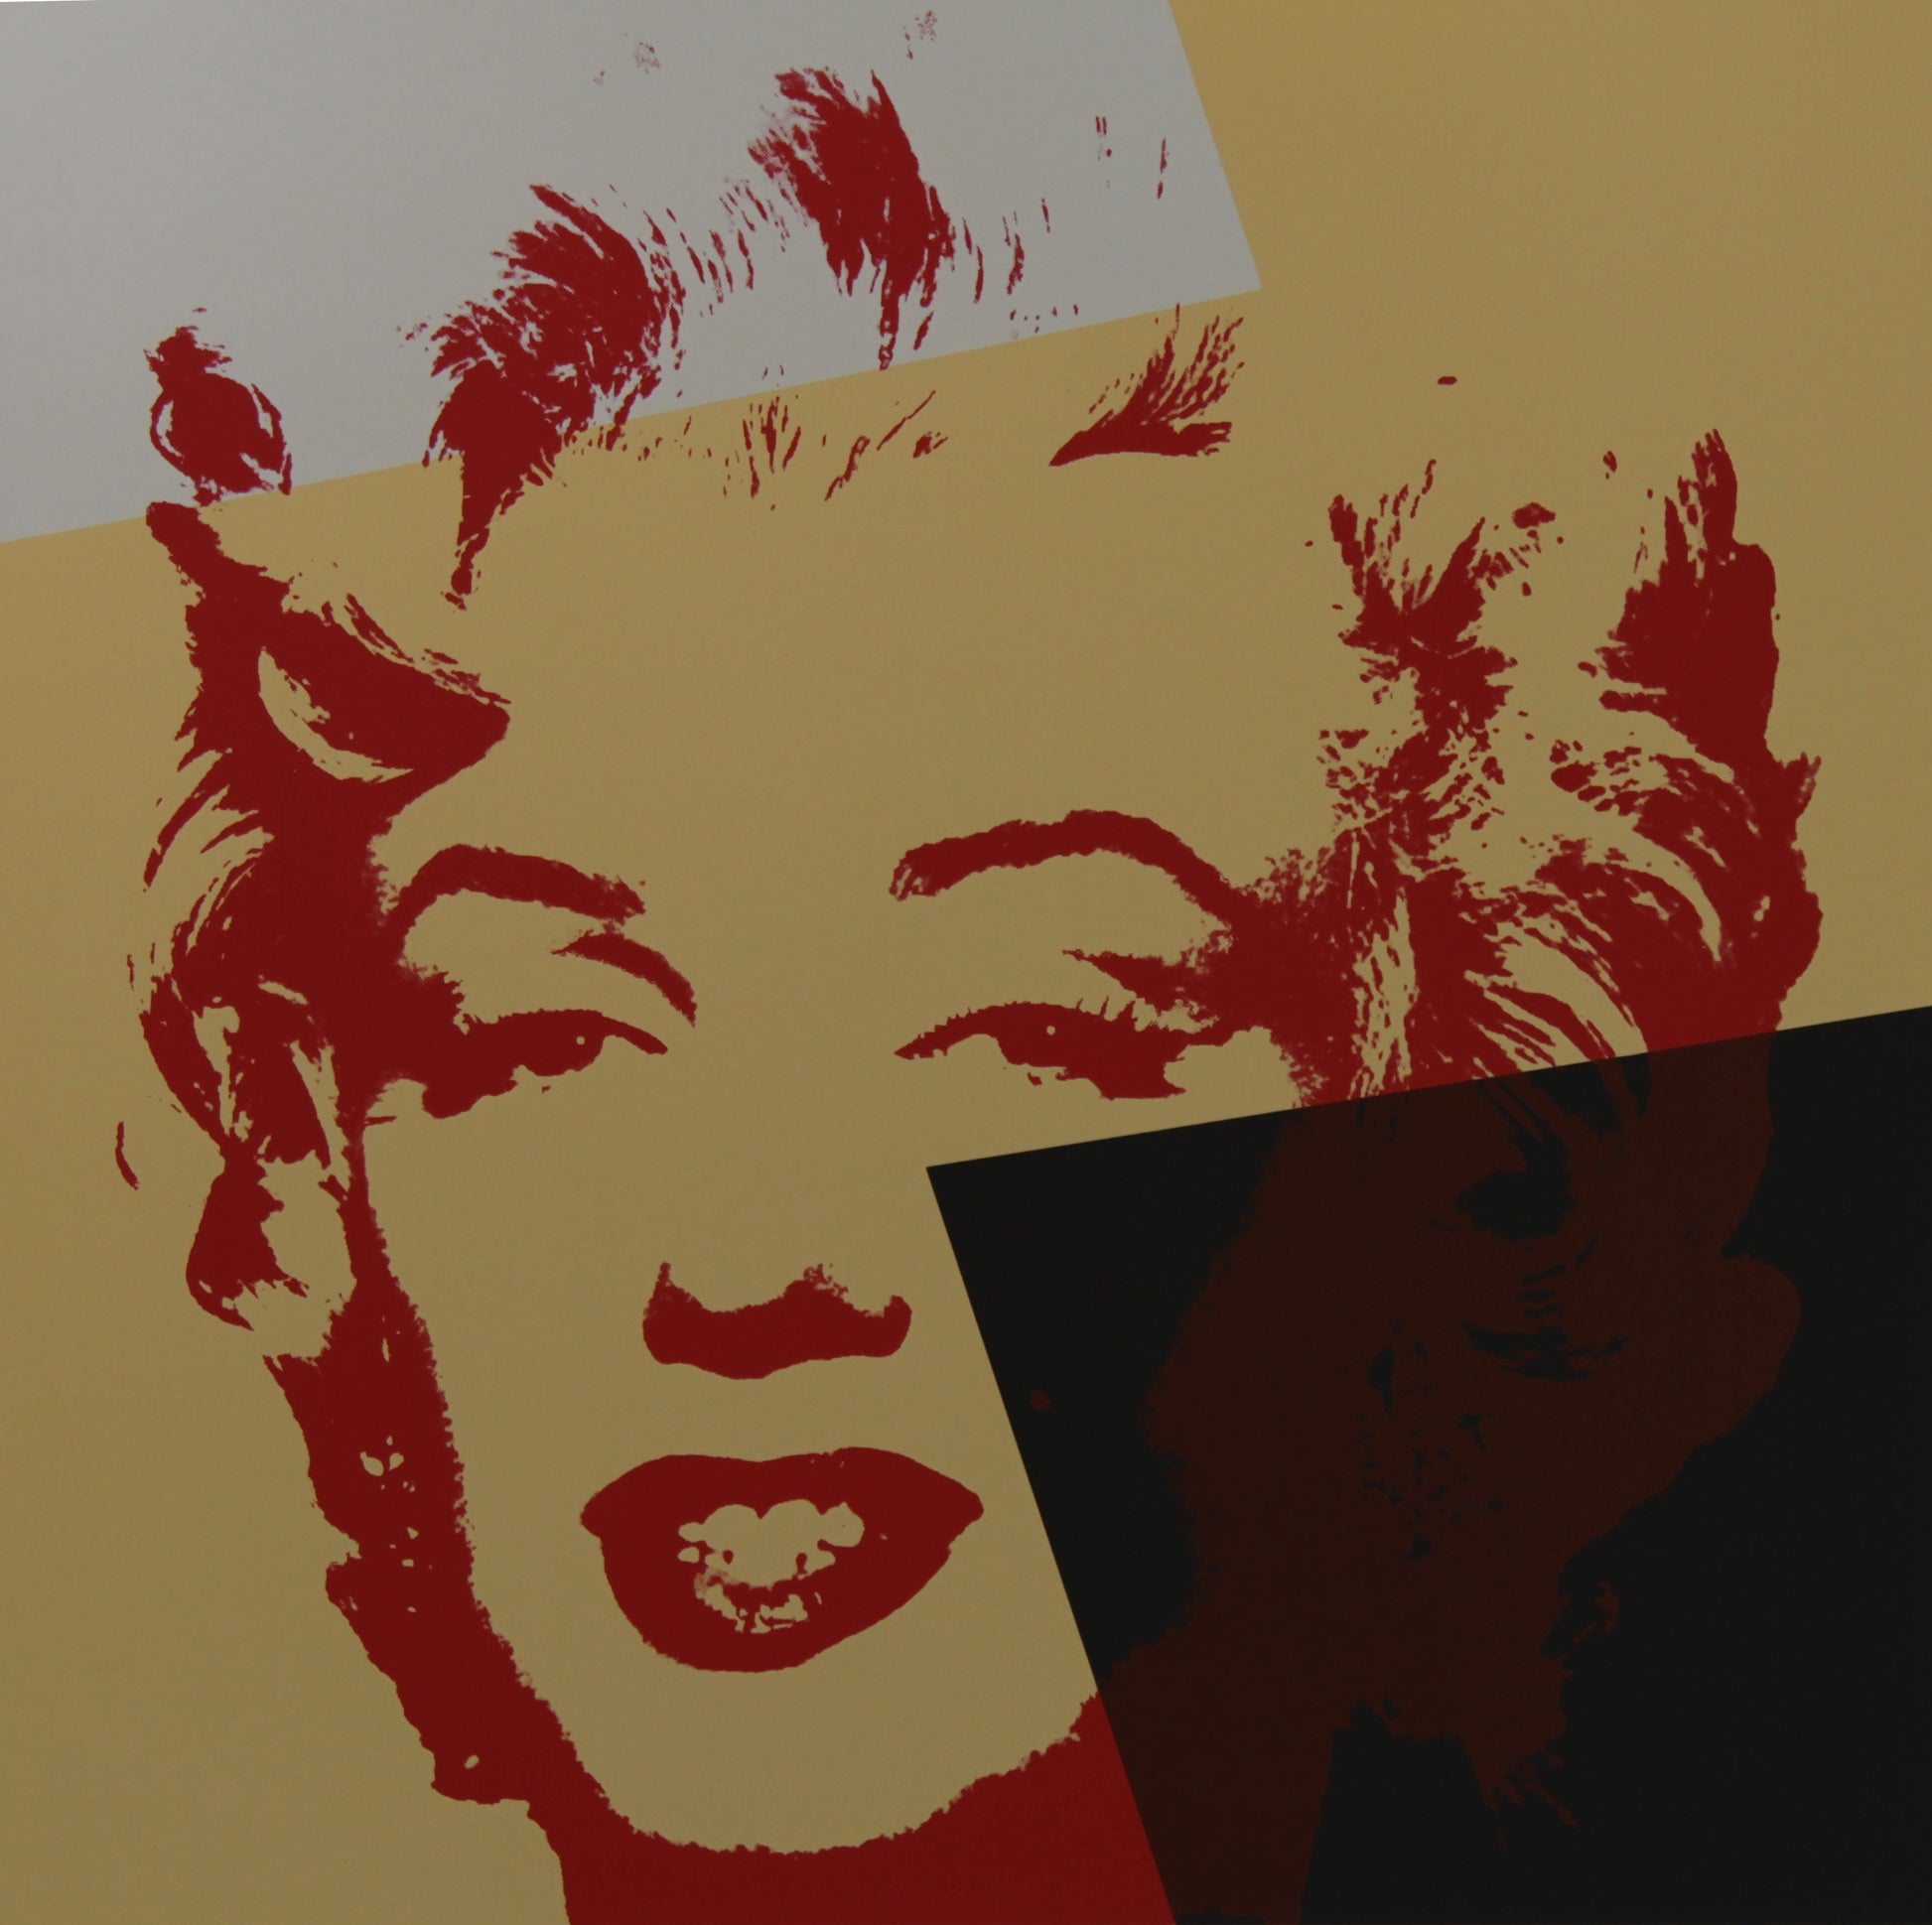 an image of an artwork by andy warhol titled 'golden marilyn 44'. the artwork features a stencilled print of the face of marilyn monroe, printed in red over a background of gold, black, and white. this is a sunday b morning print for sale.